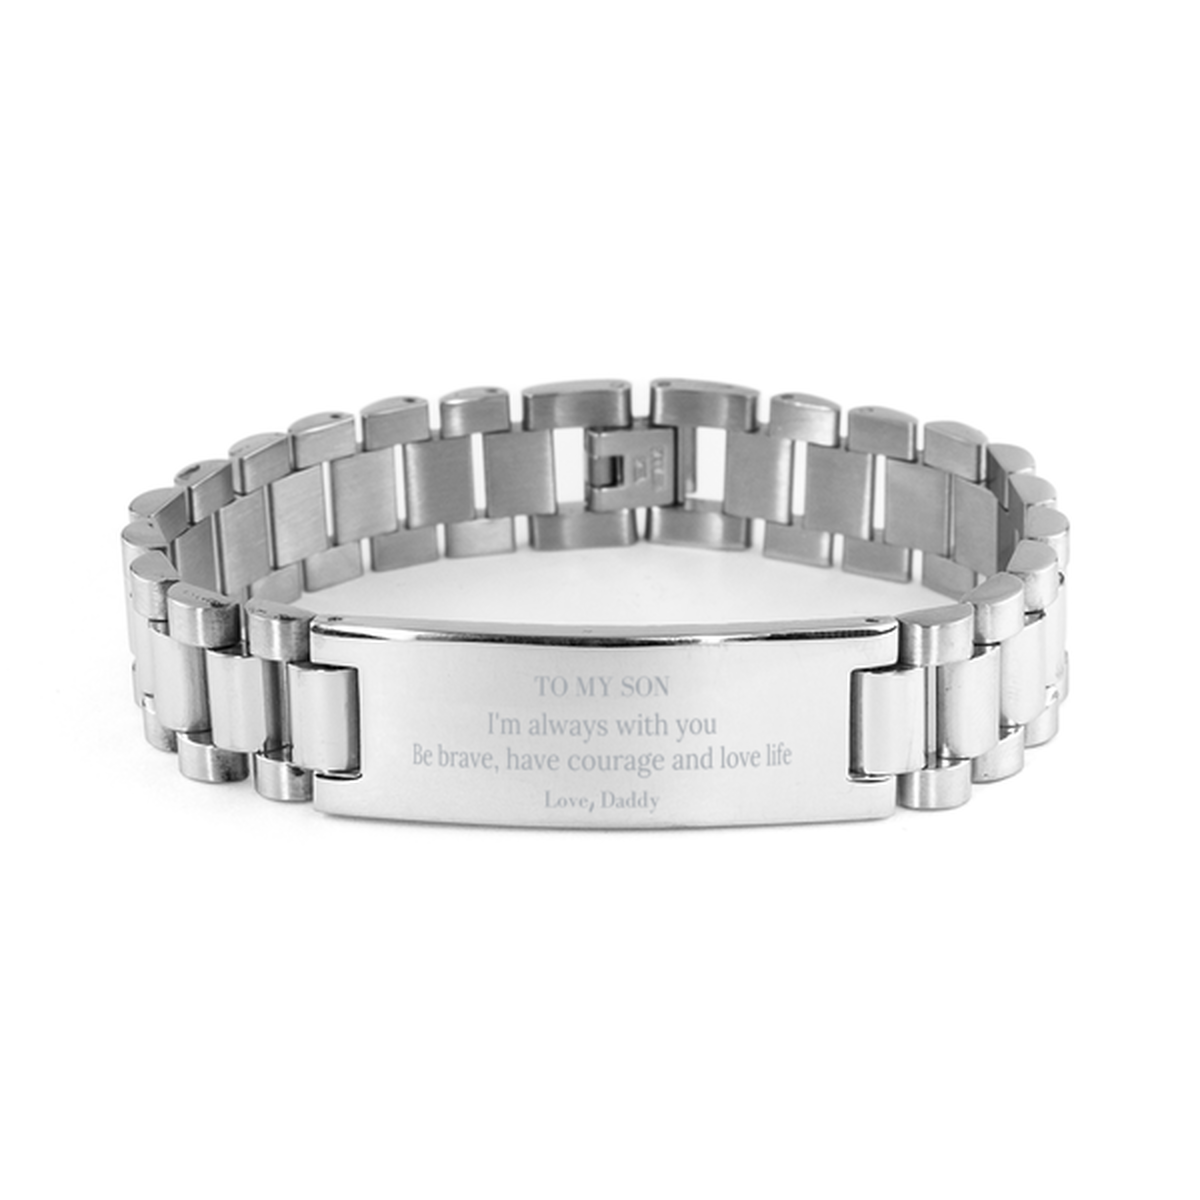 To My Son Gifts from Daddy, Unique Ladder Stainless Steel Bracelet Inspirational Christmas Birthday Graduation Gifts for Son I'm always with you. Be brave, have courage and love life. Love, Daddy